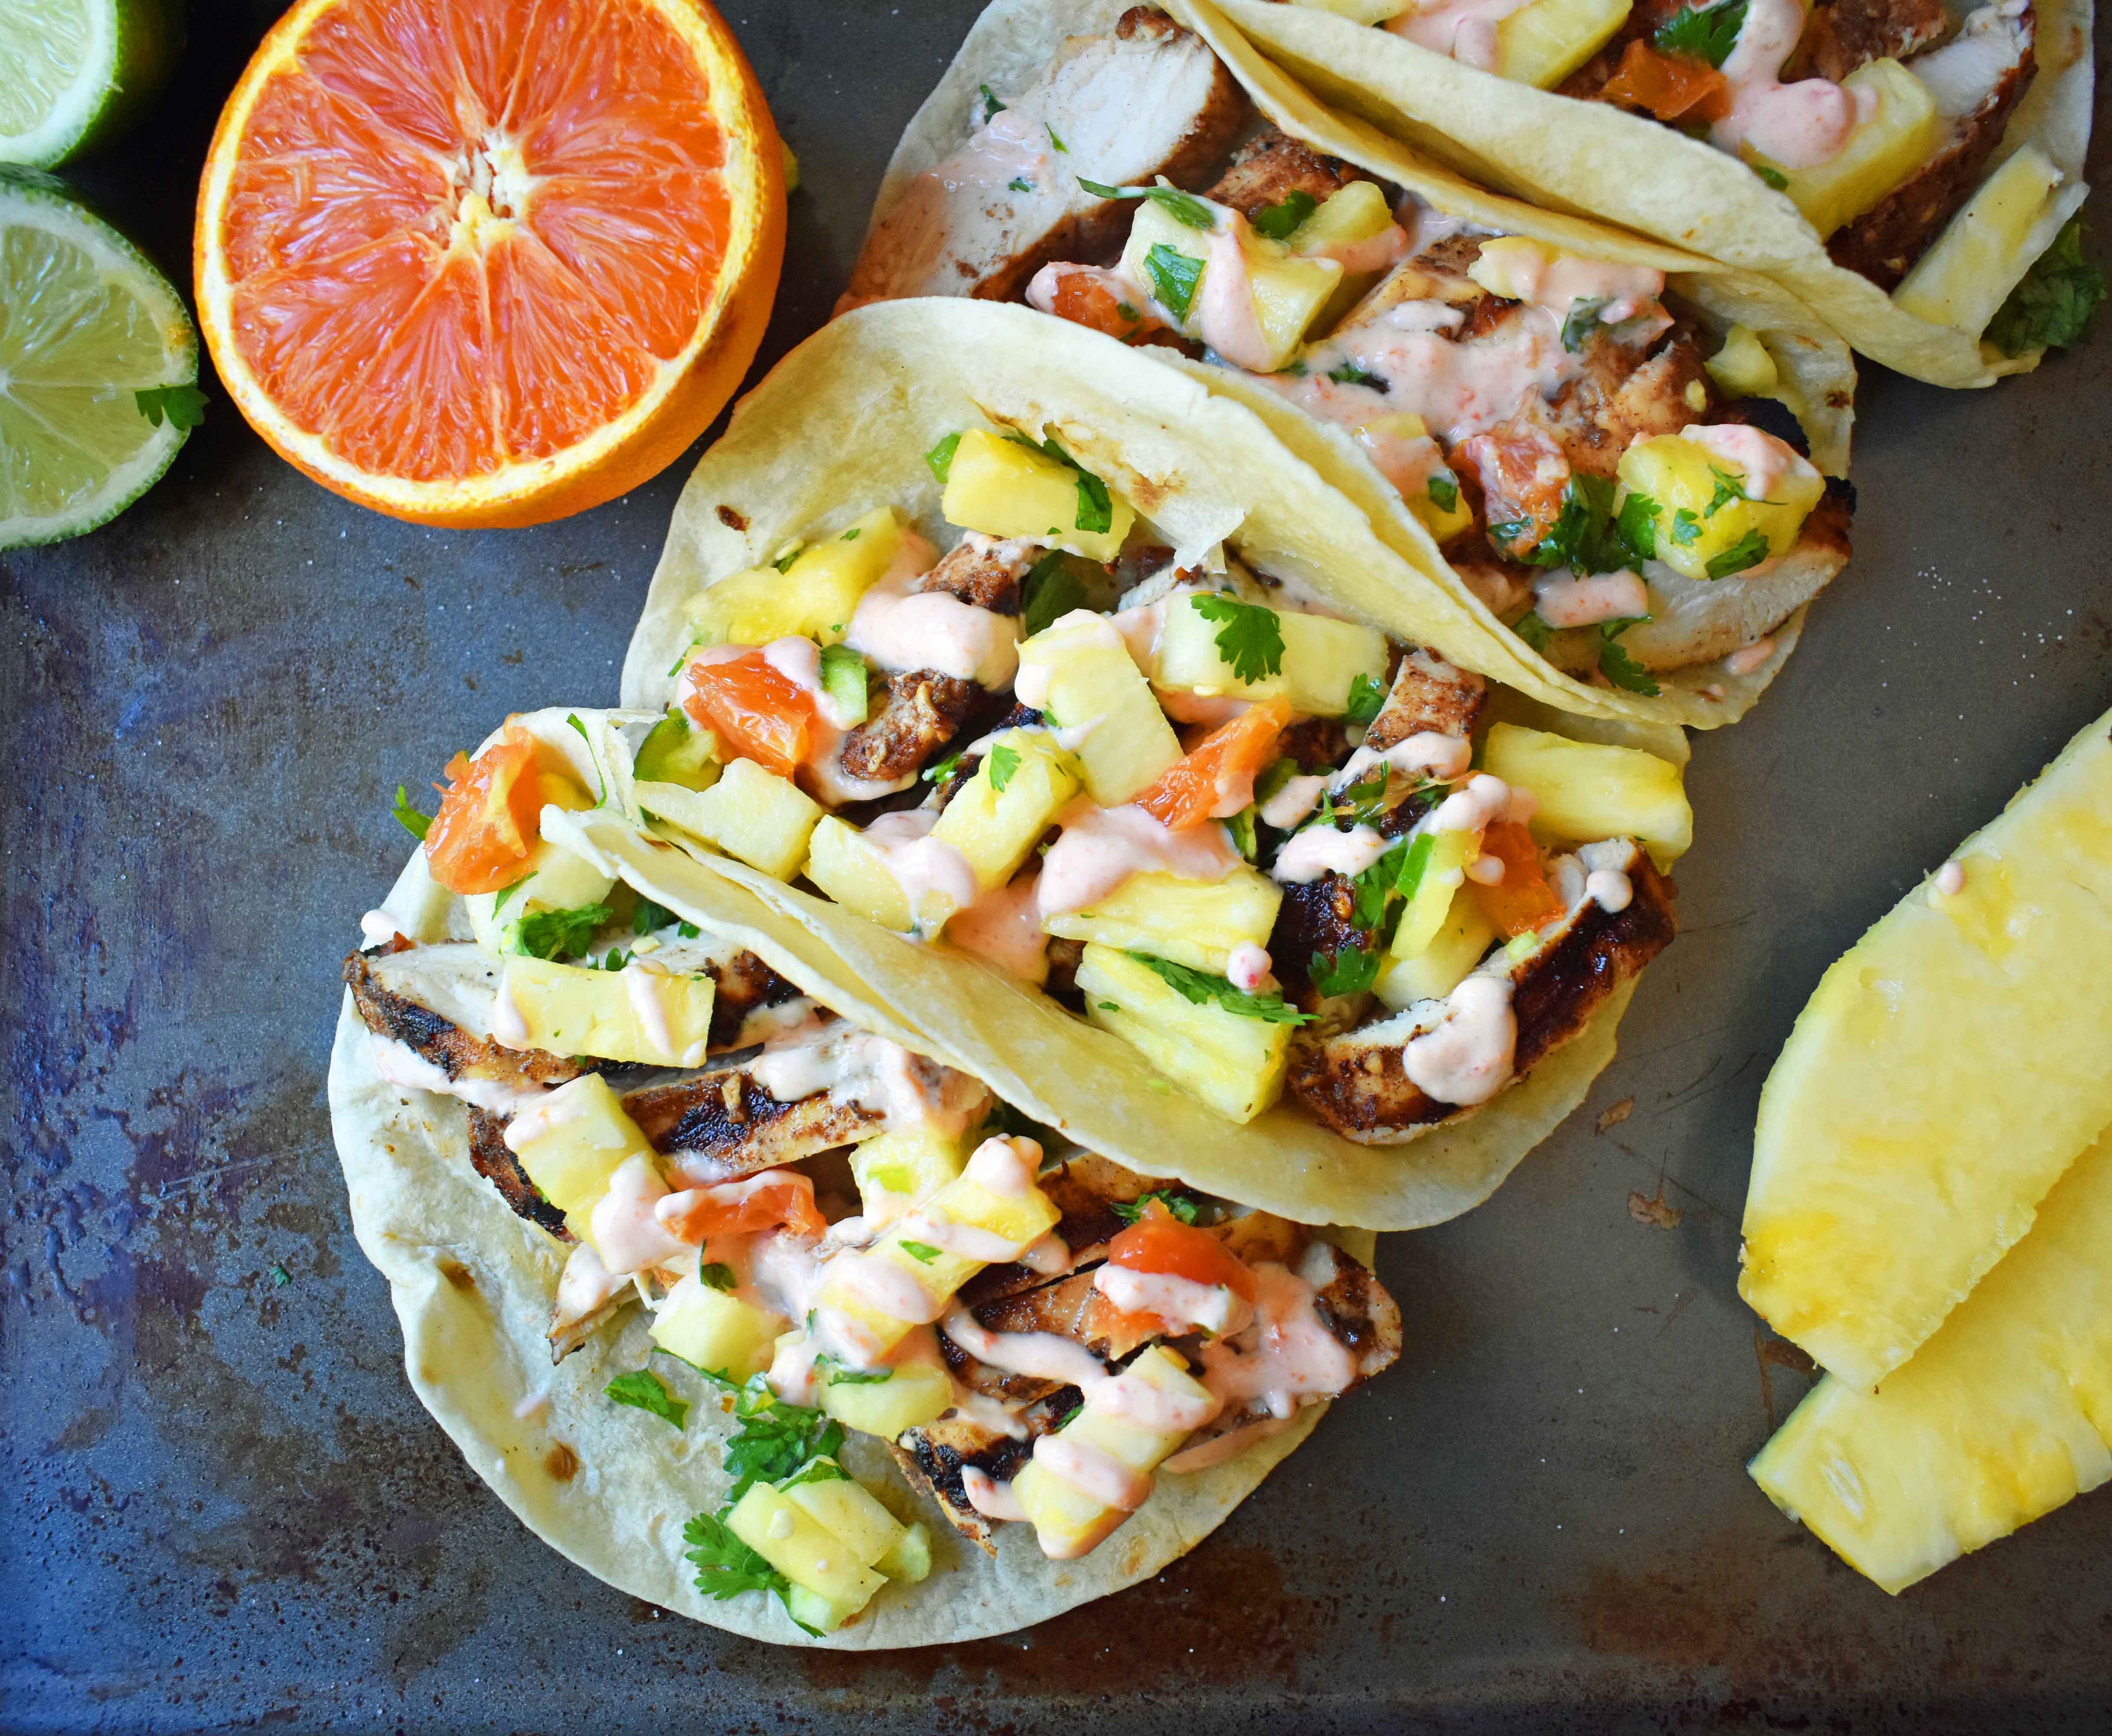 Jamaican Jerk Chicken Tacos. Caribbean spiced citrus grilled chicken filled tacos with pineapple salsa and spicy cream. www.modernhoney.com